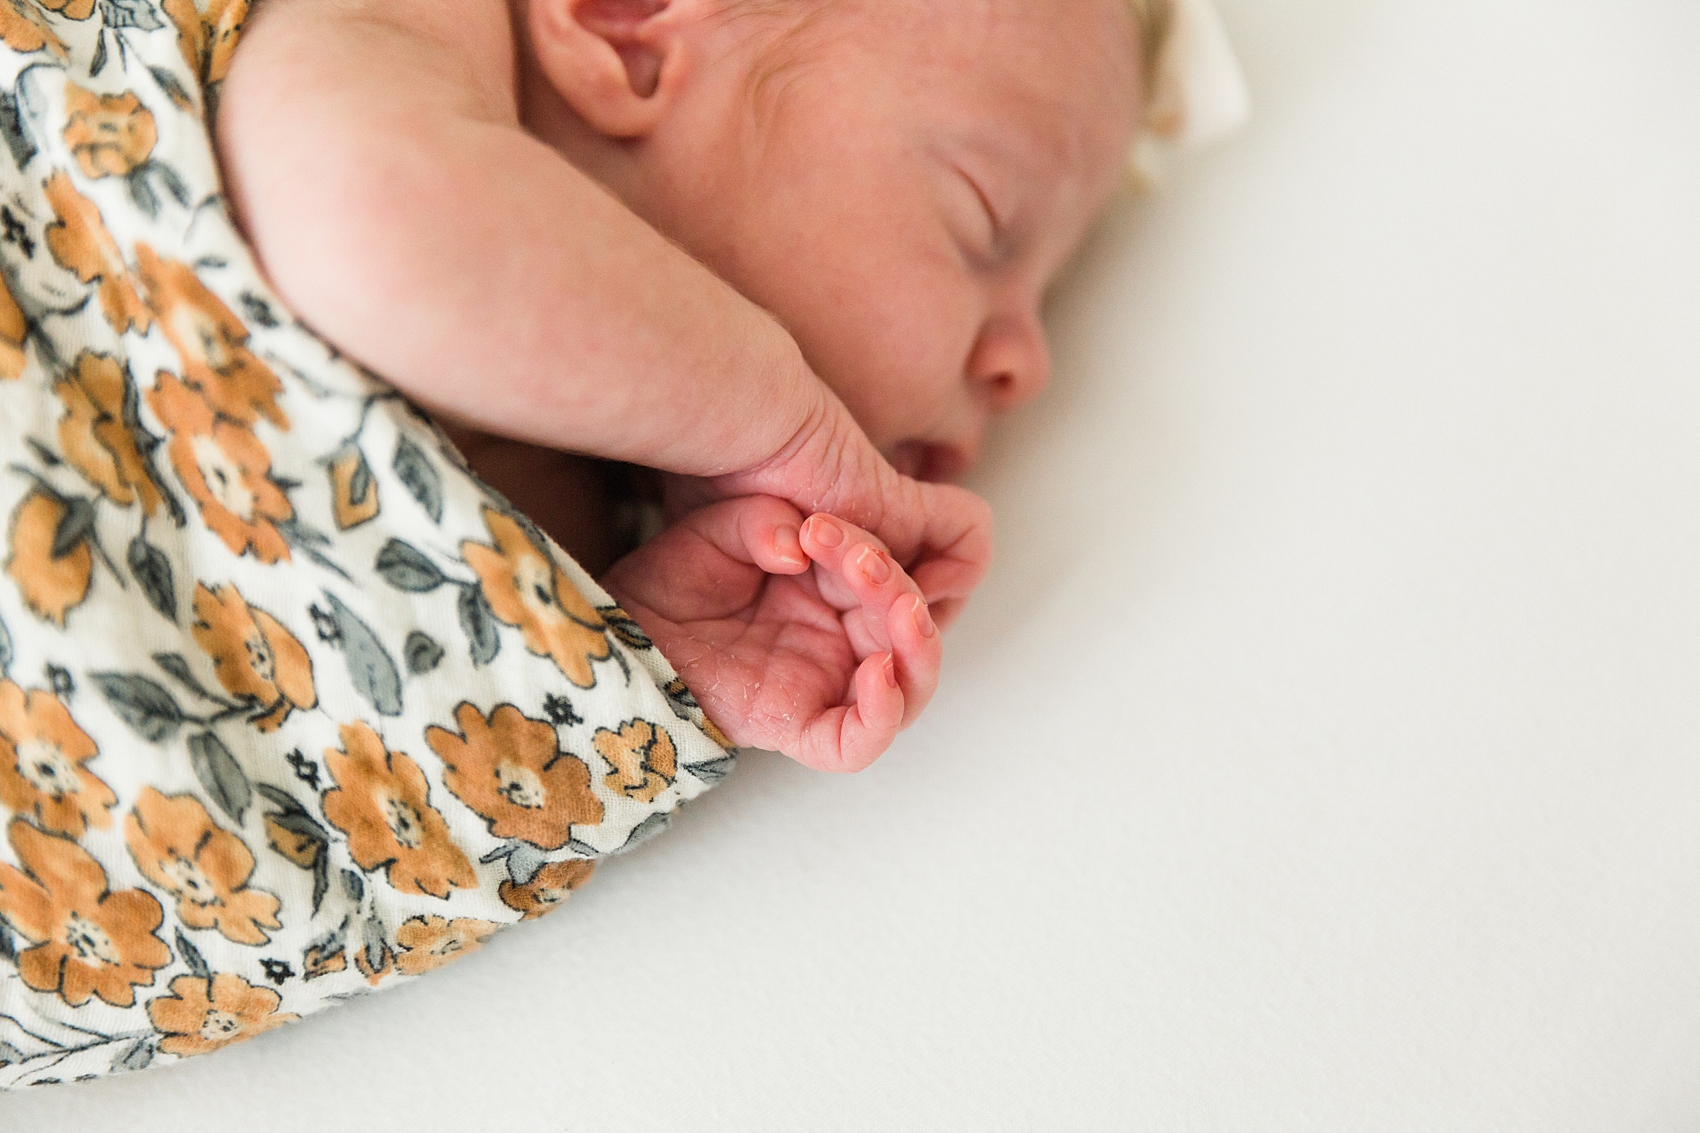 Leah Hope Photography | Scottsdale Phoenix Arizona | Newborn Pictures | Baby Nursery Photos | Indoor Lifestyle Session | Dreamy Nursery | Sibling Photos | What to Wear | Lifestyle Newborn